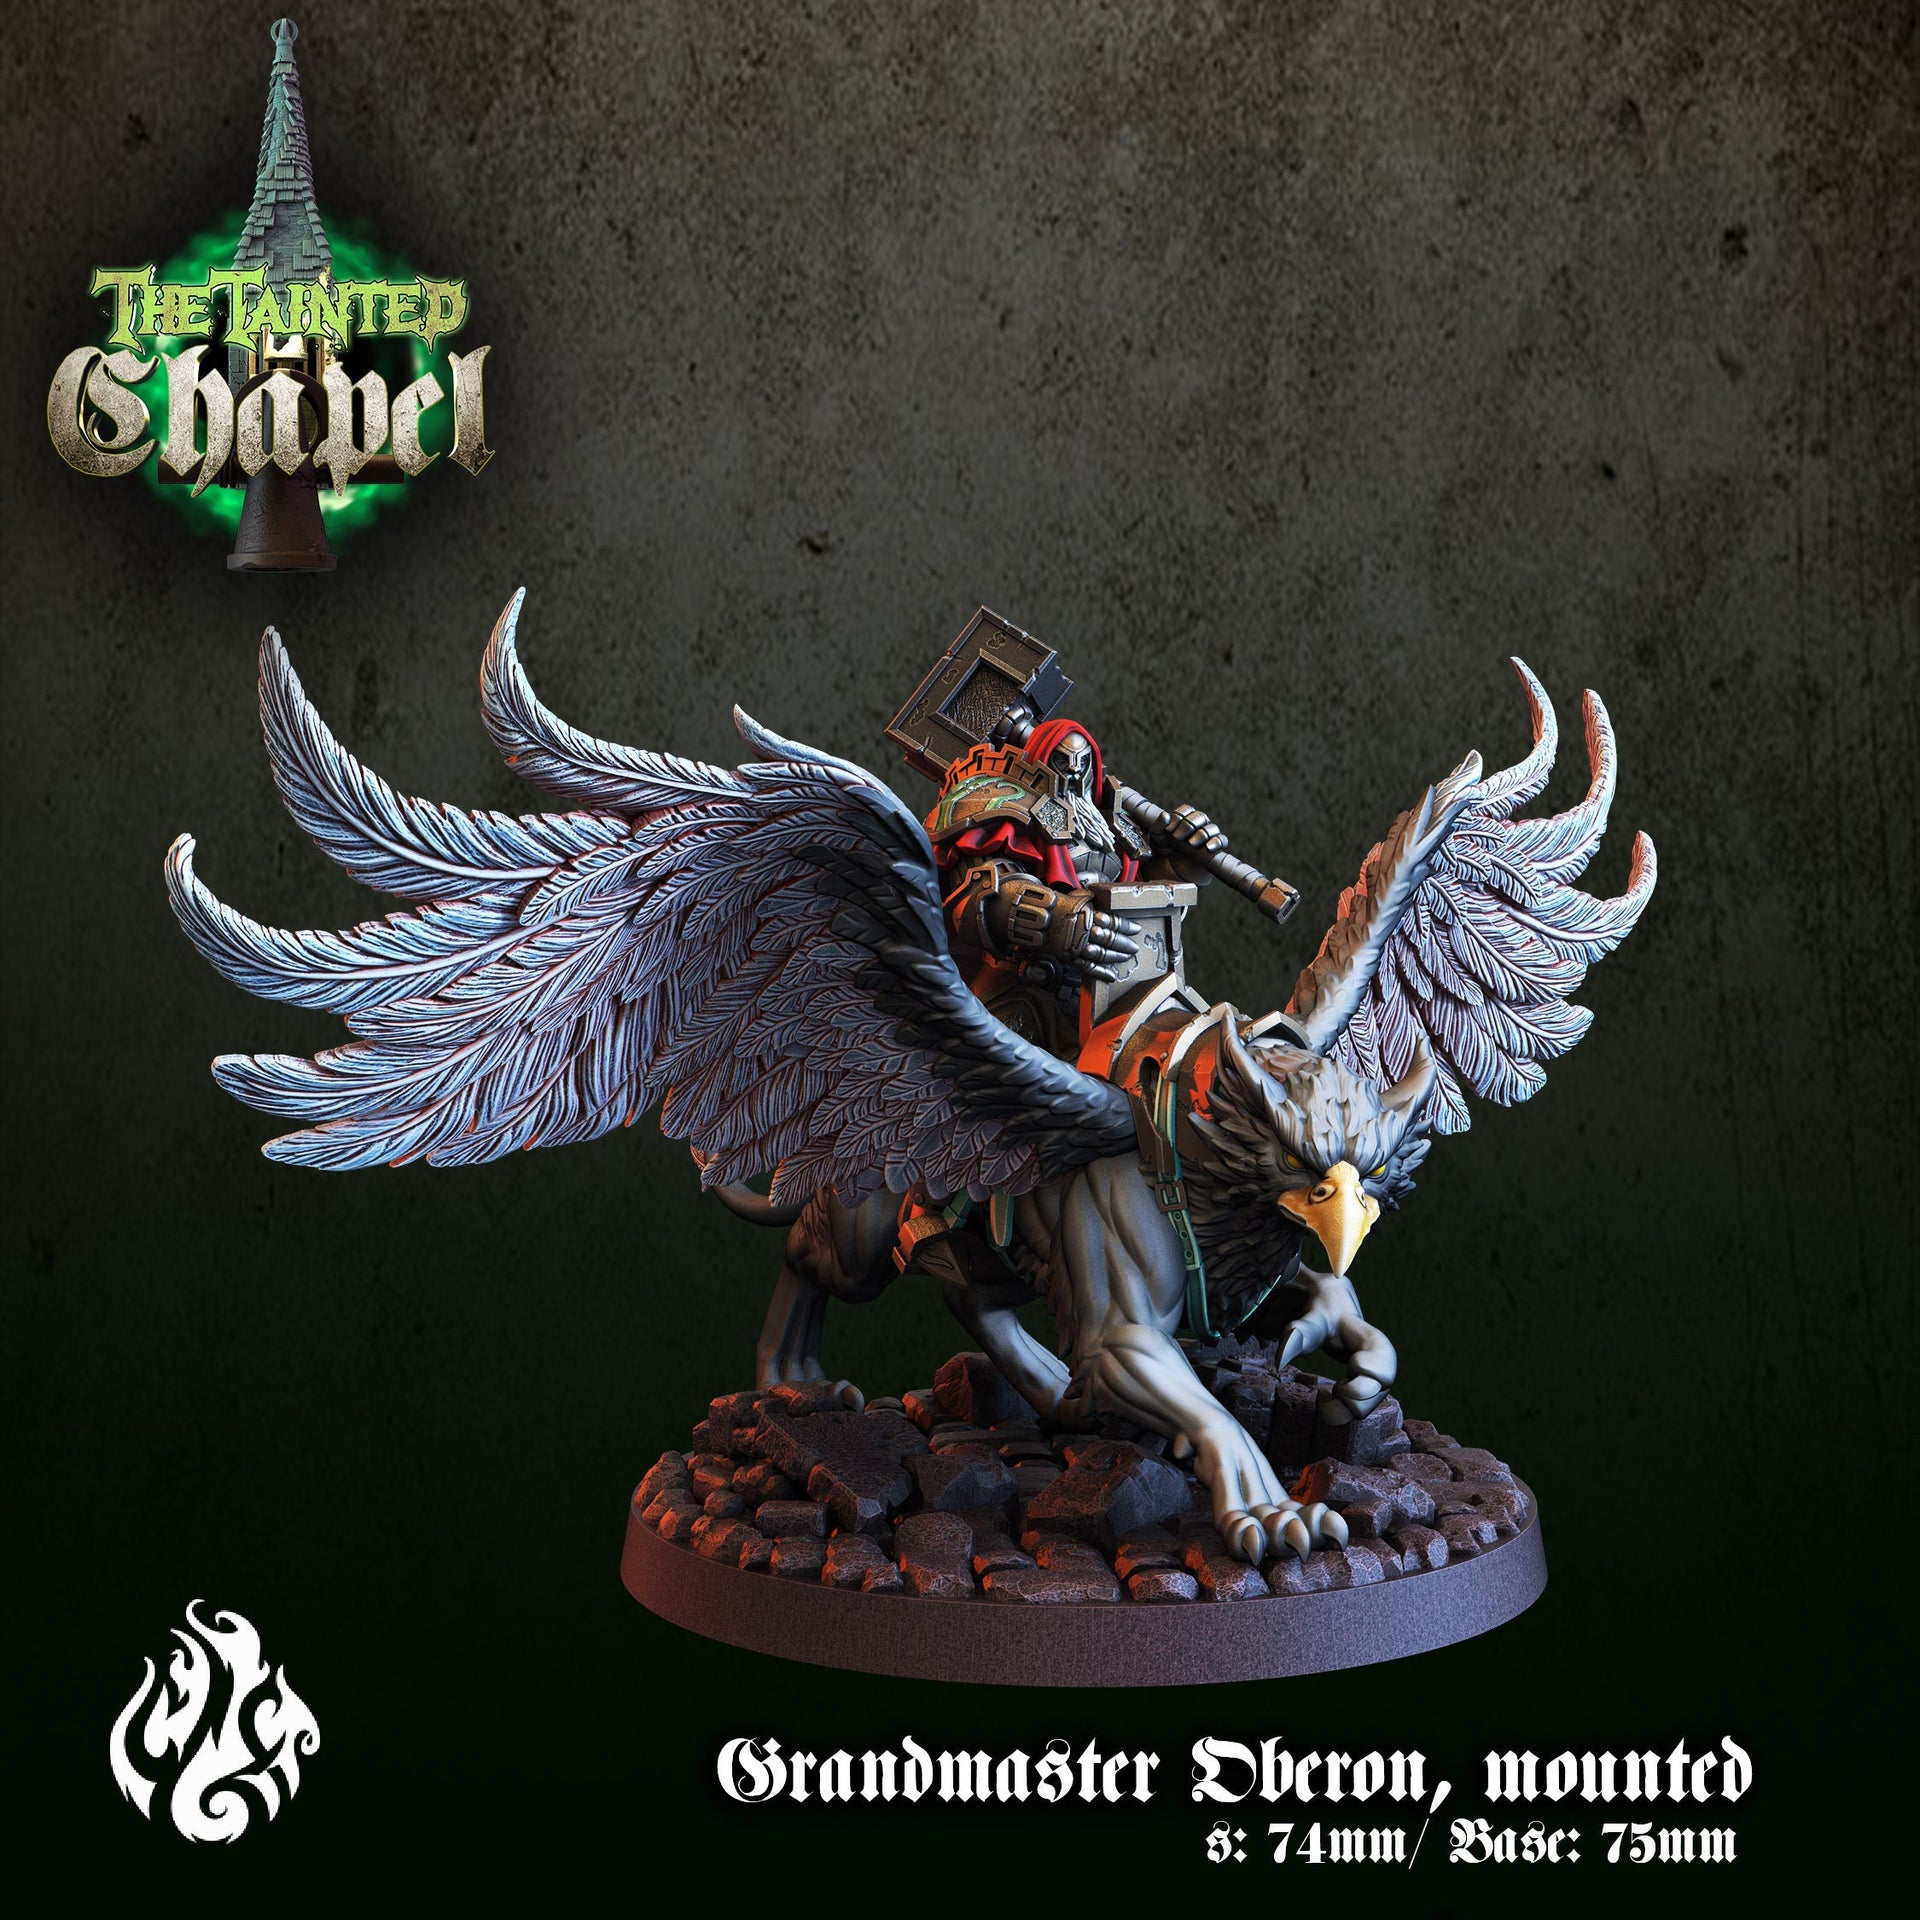 Grandmaster Oberon, Mounted - Crippled God Foundry - The Tainted Chapel